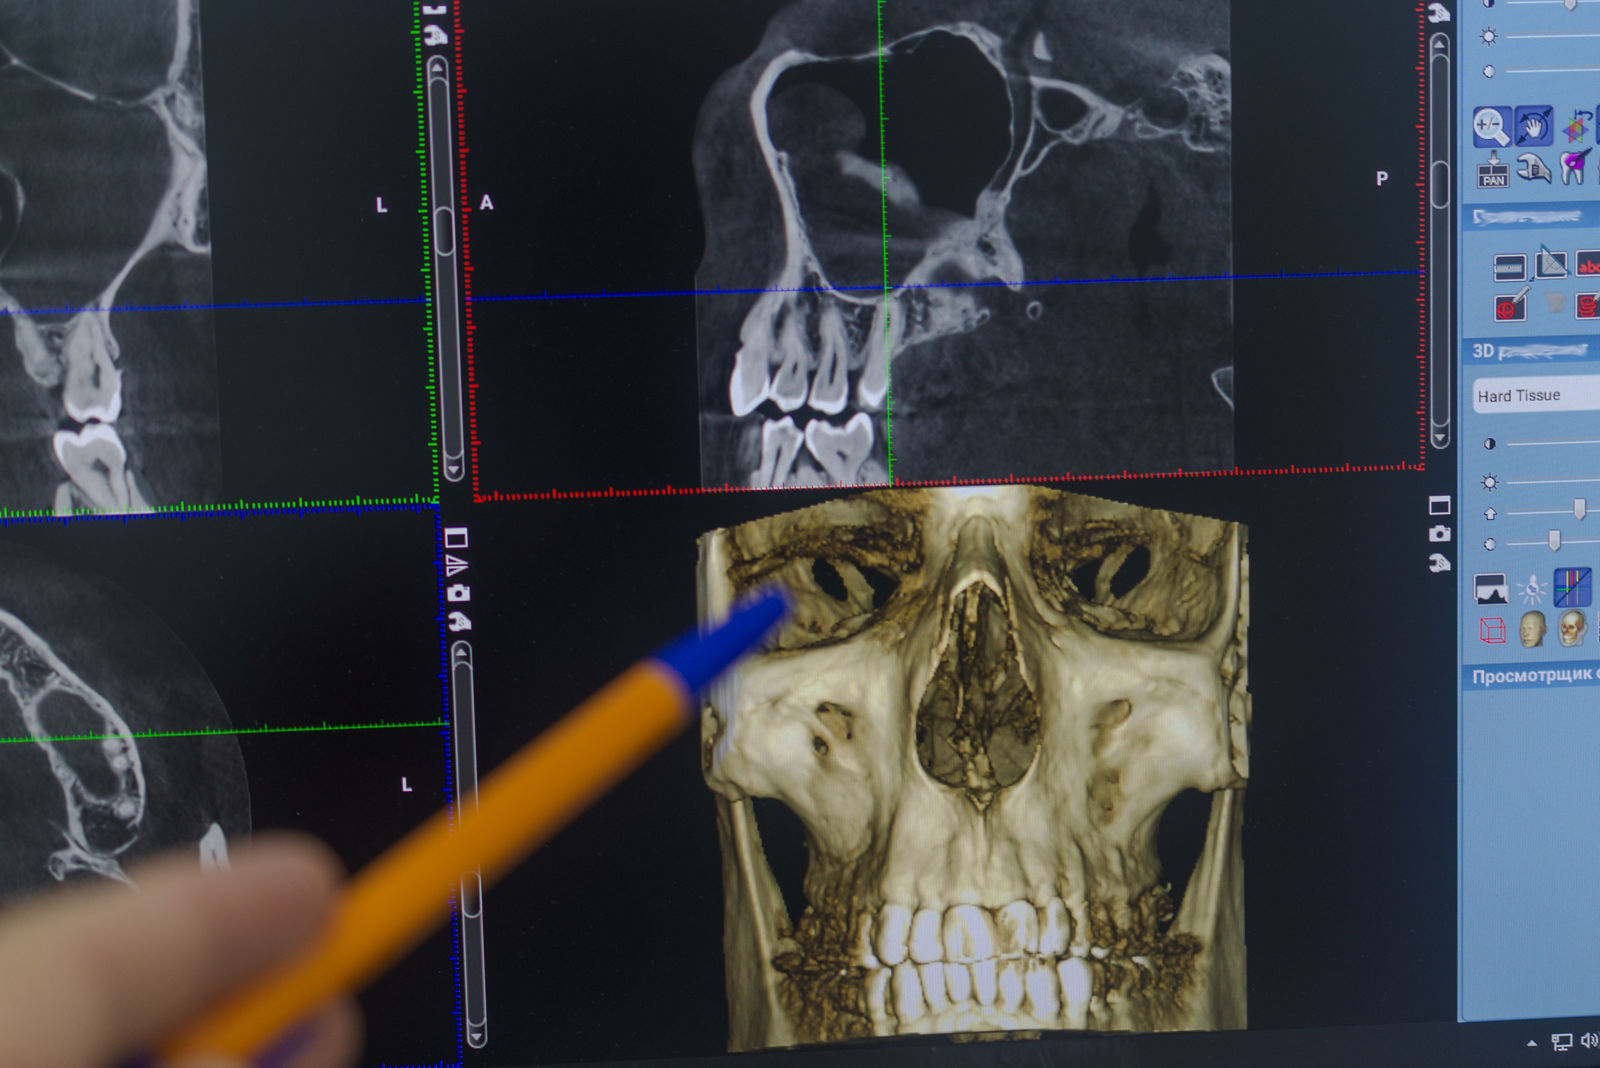 The doctor examines a X-ray examination of the maxillofacial region of the head on a computer monitor. Cone Beam Computed Tomography